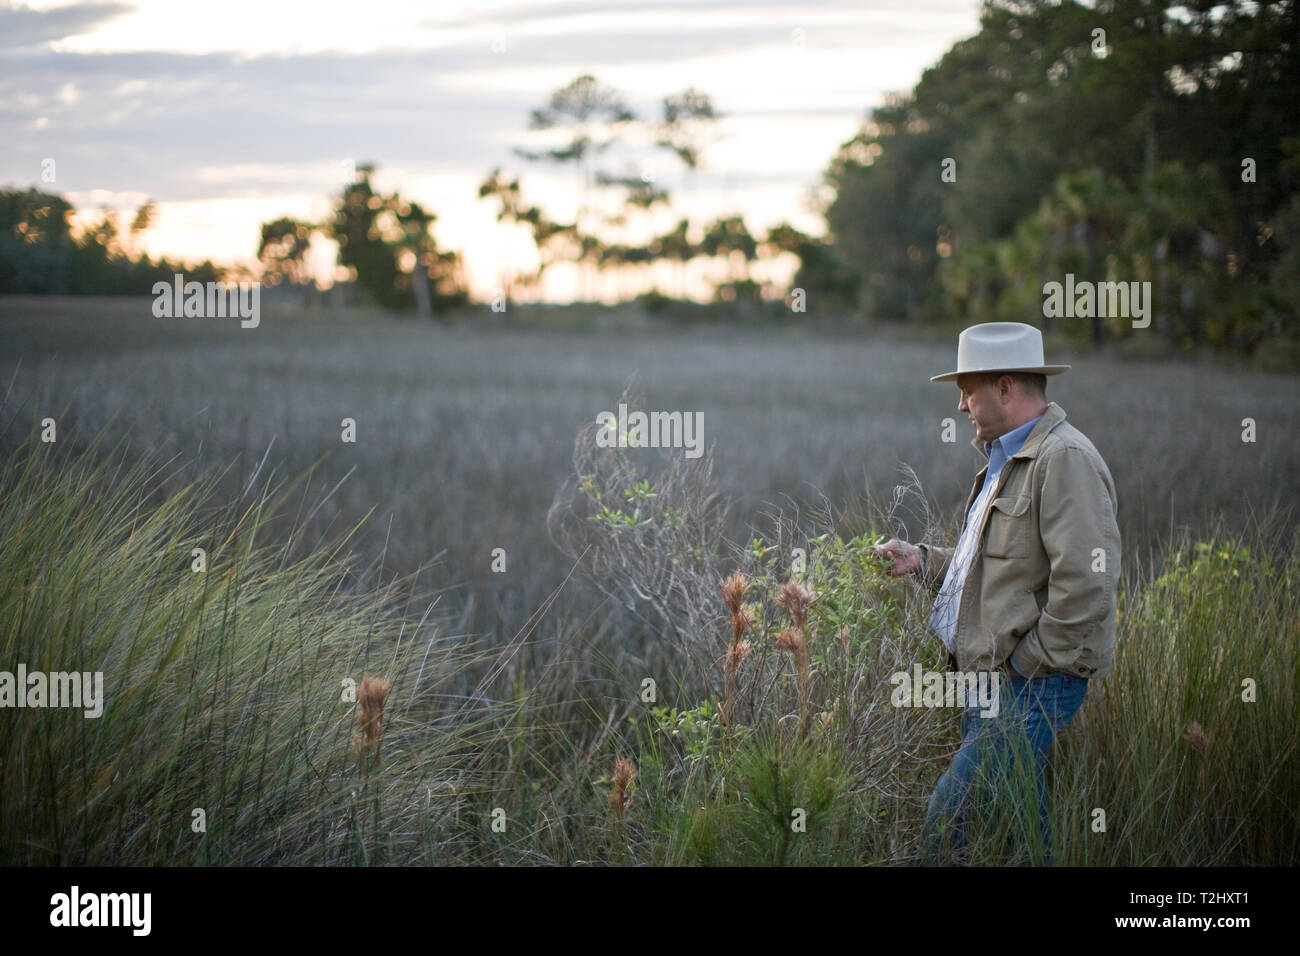 Man wearing a fedora hat and standing in a field Stock Photo